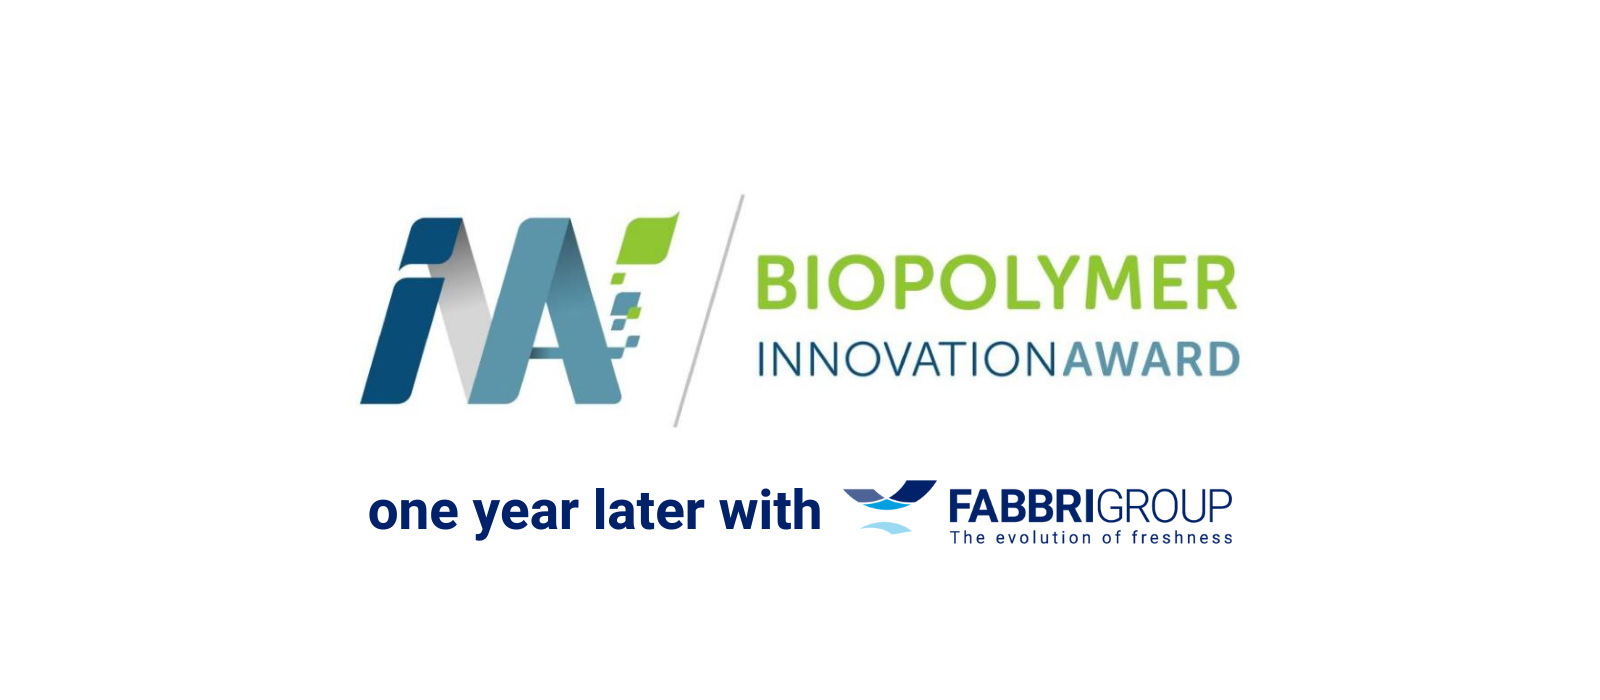 Biopolymer Innovation Award to Fabbri Group one year later